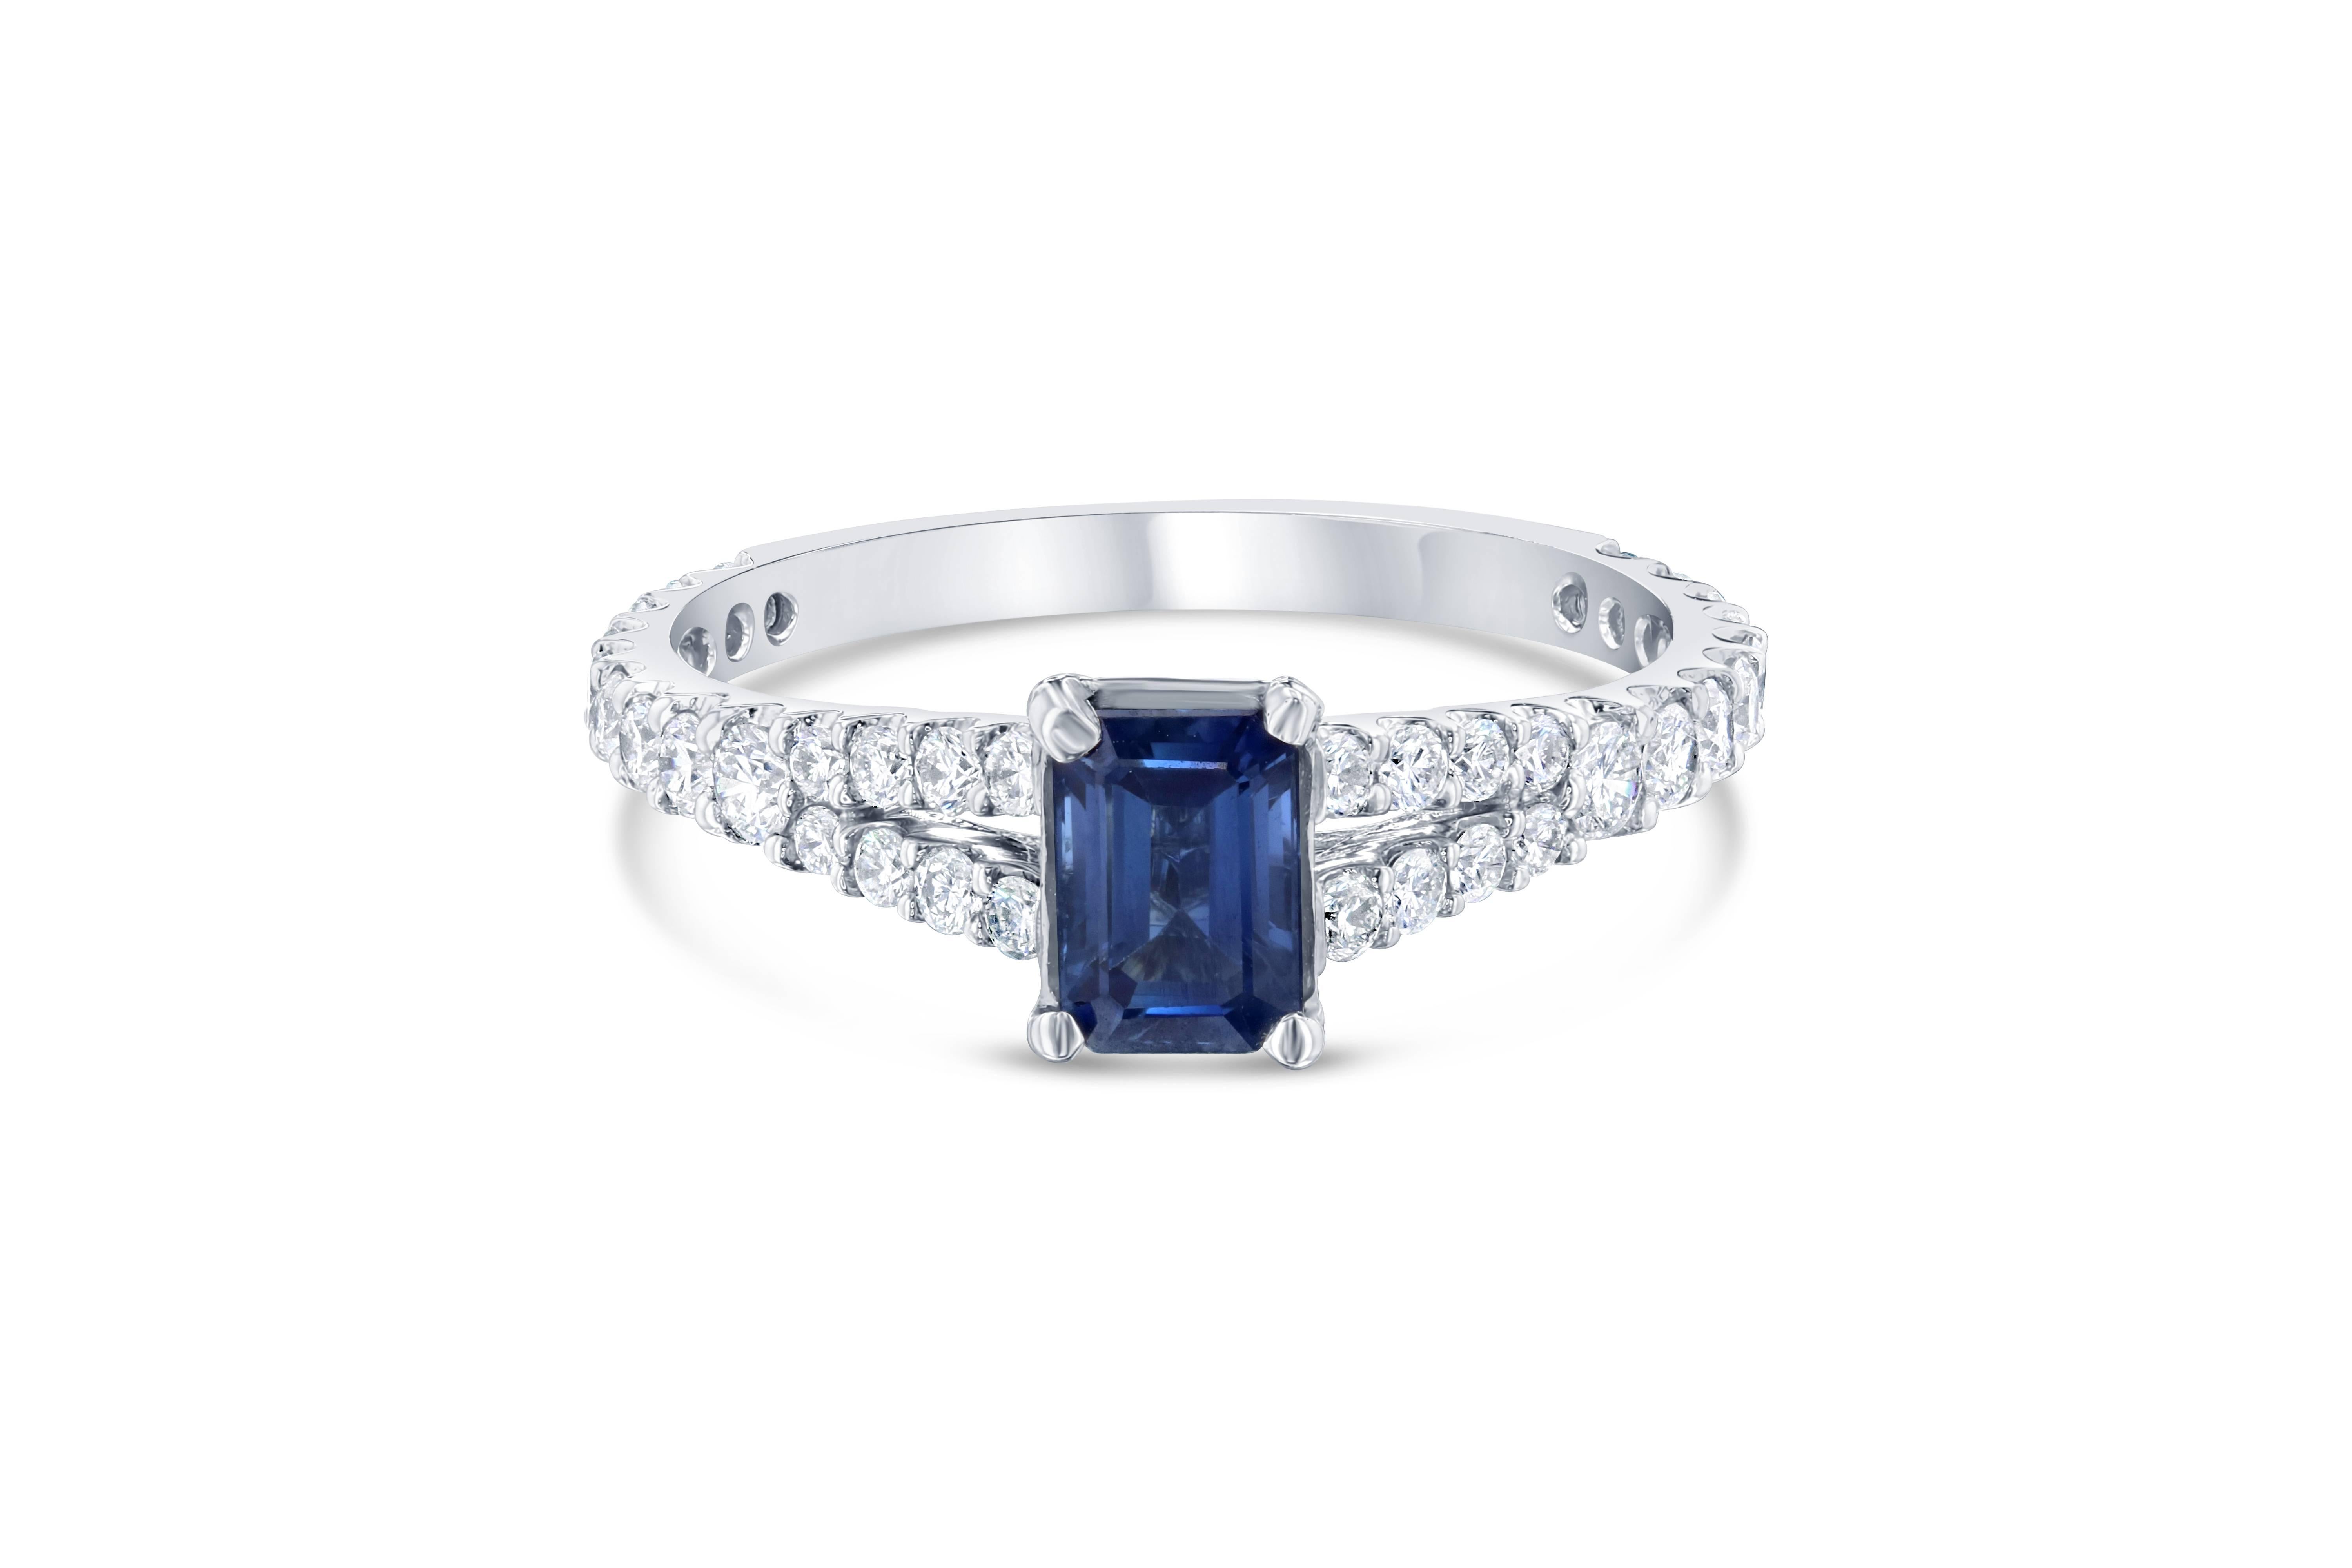 This simple yet eye catching Blue Sapphire Ring is a unique twist to the traditional Engagement Rings. The emerald cut Blue Sapphire is 0.79 Carats and has 36 Round Cut Diamonds at 0.56 Carats with a unique split shank. The diamonds also have a